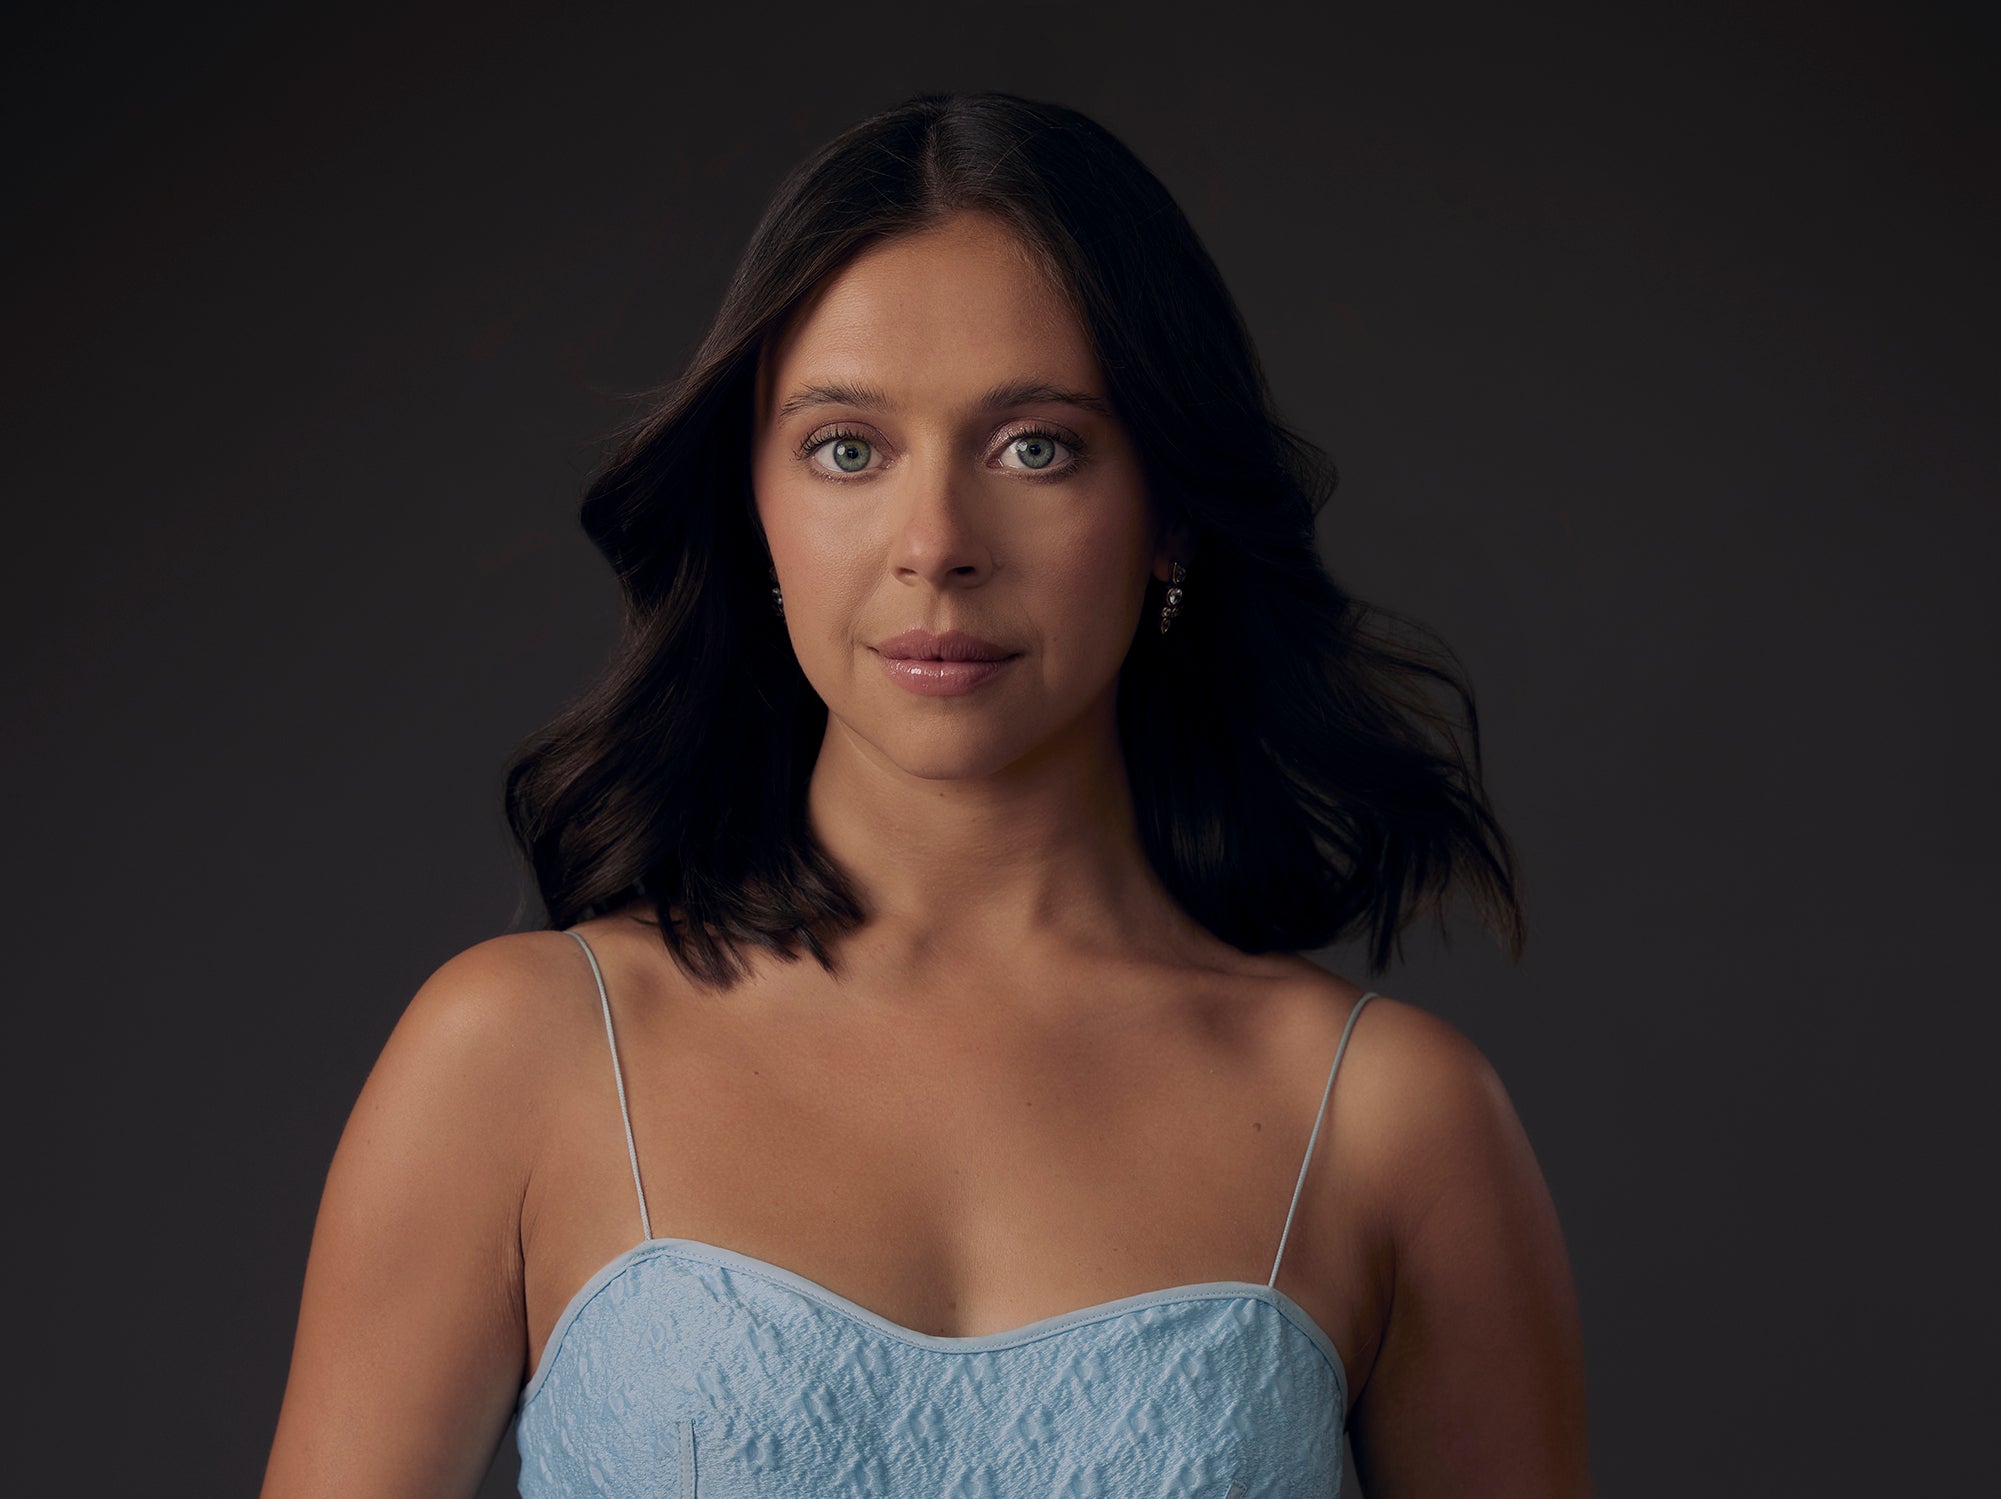 Bel Powley on Botox, nepotism and difficult sex scenes The heroin chic thing is gonna die again, right? The Independent image